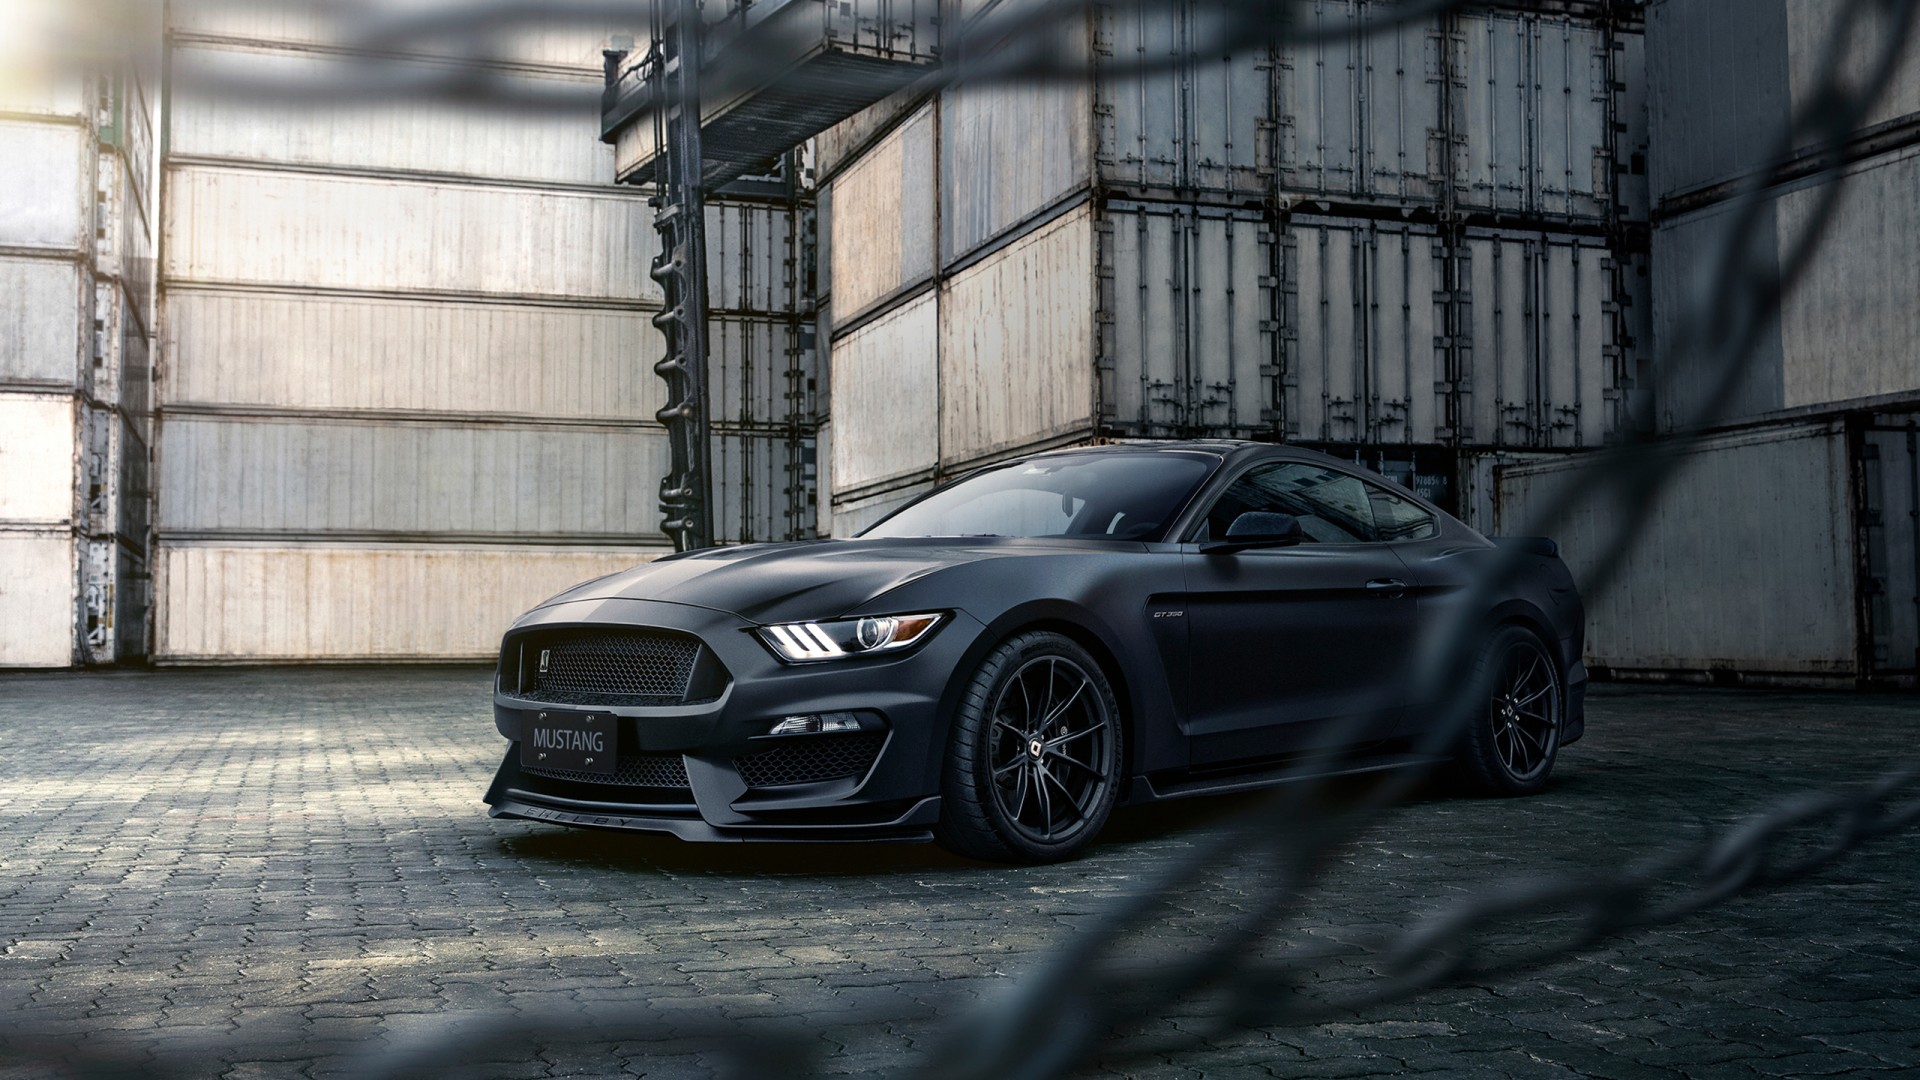 Ford Mustang Shelby GT350 3 Wallpaper | HD Car Wallpapers | ID #14962